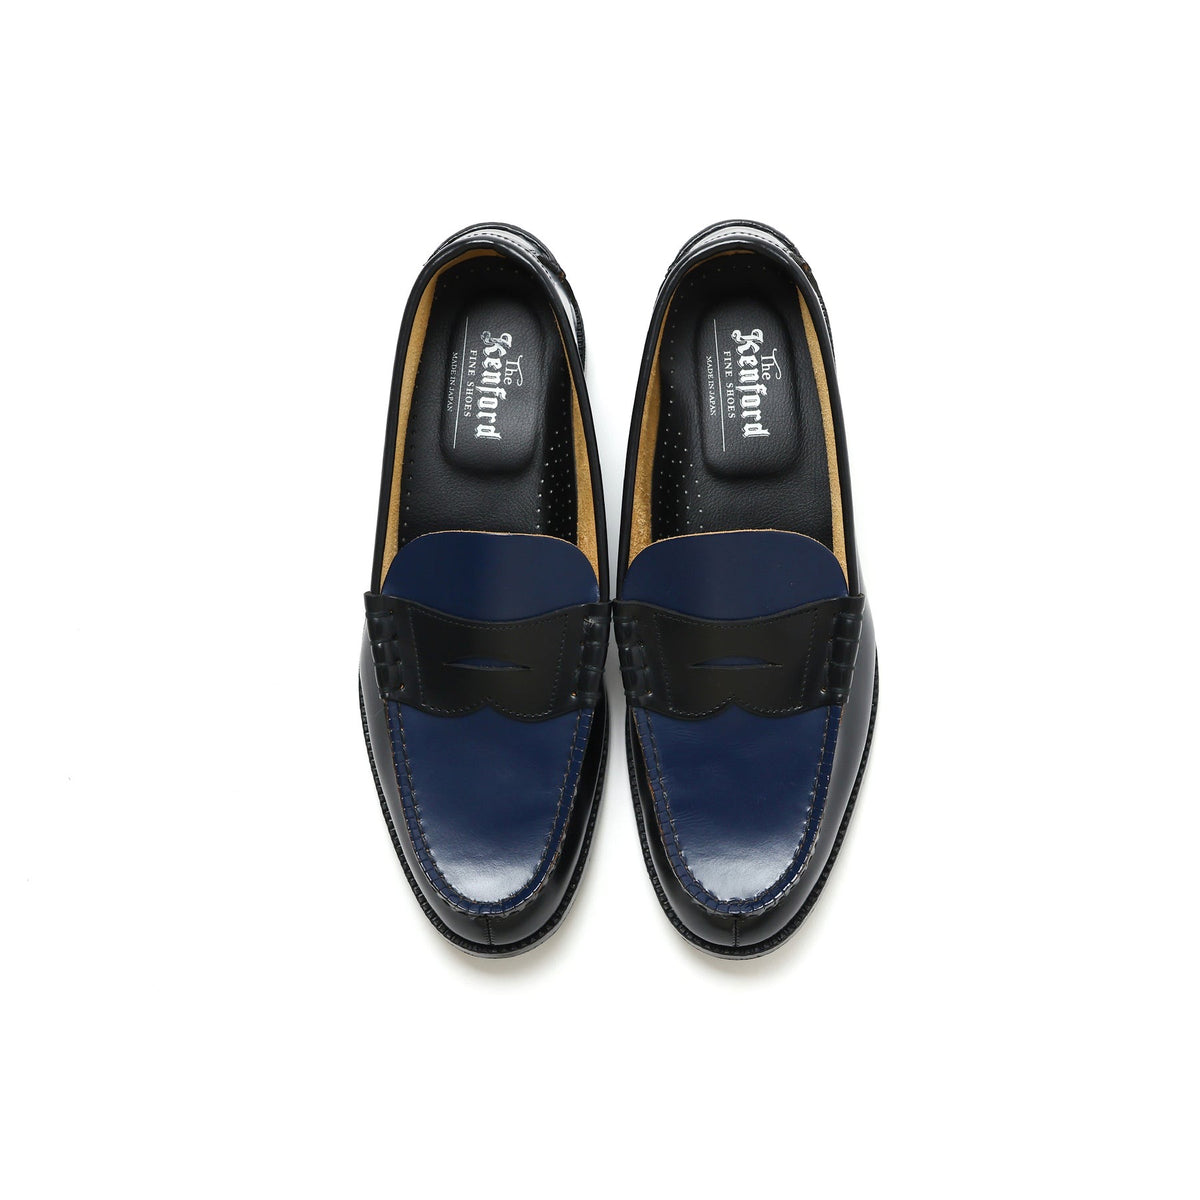 The Kenford Fineshoes】COMBI LOAFERS Black/Navy – briwn